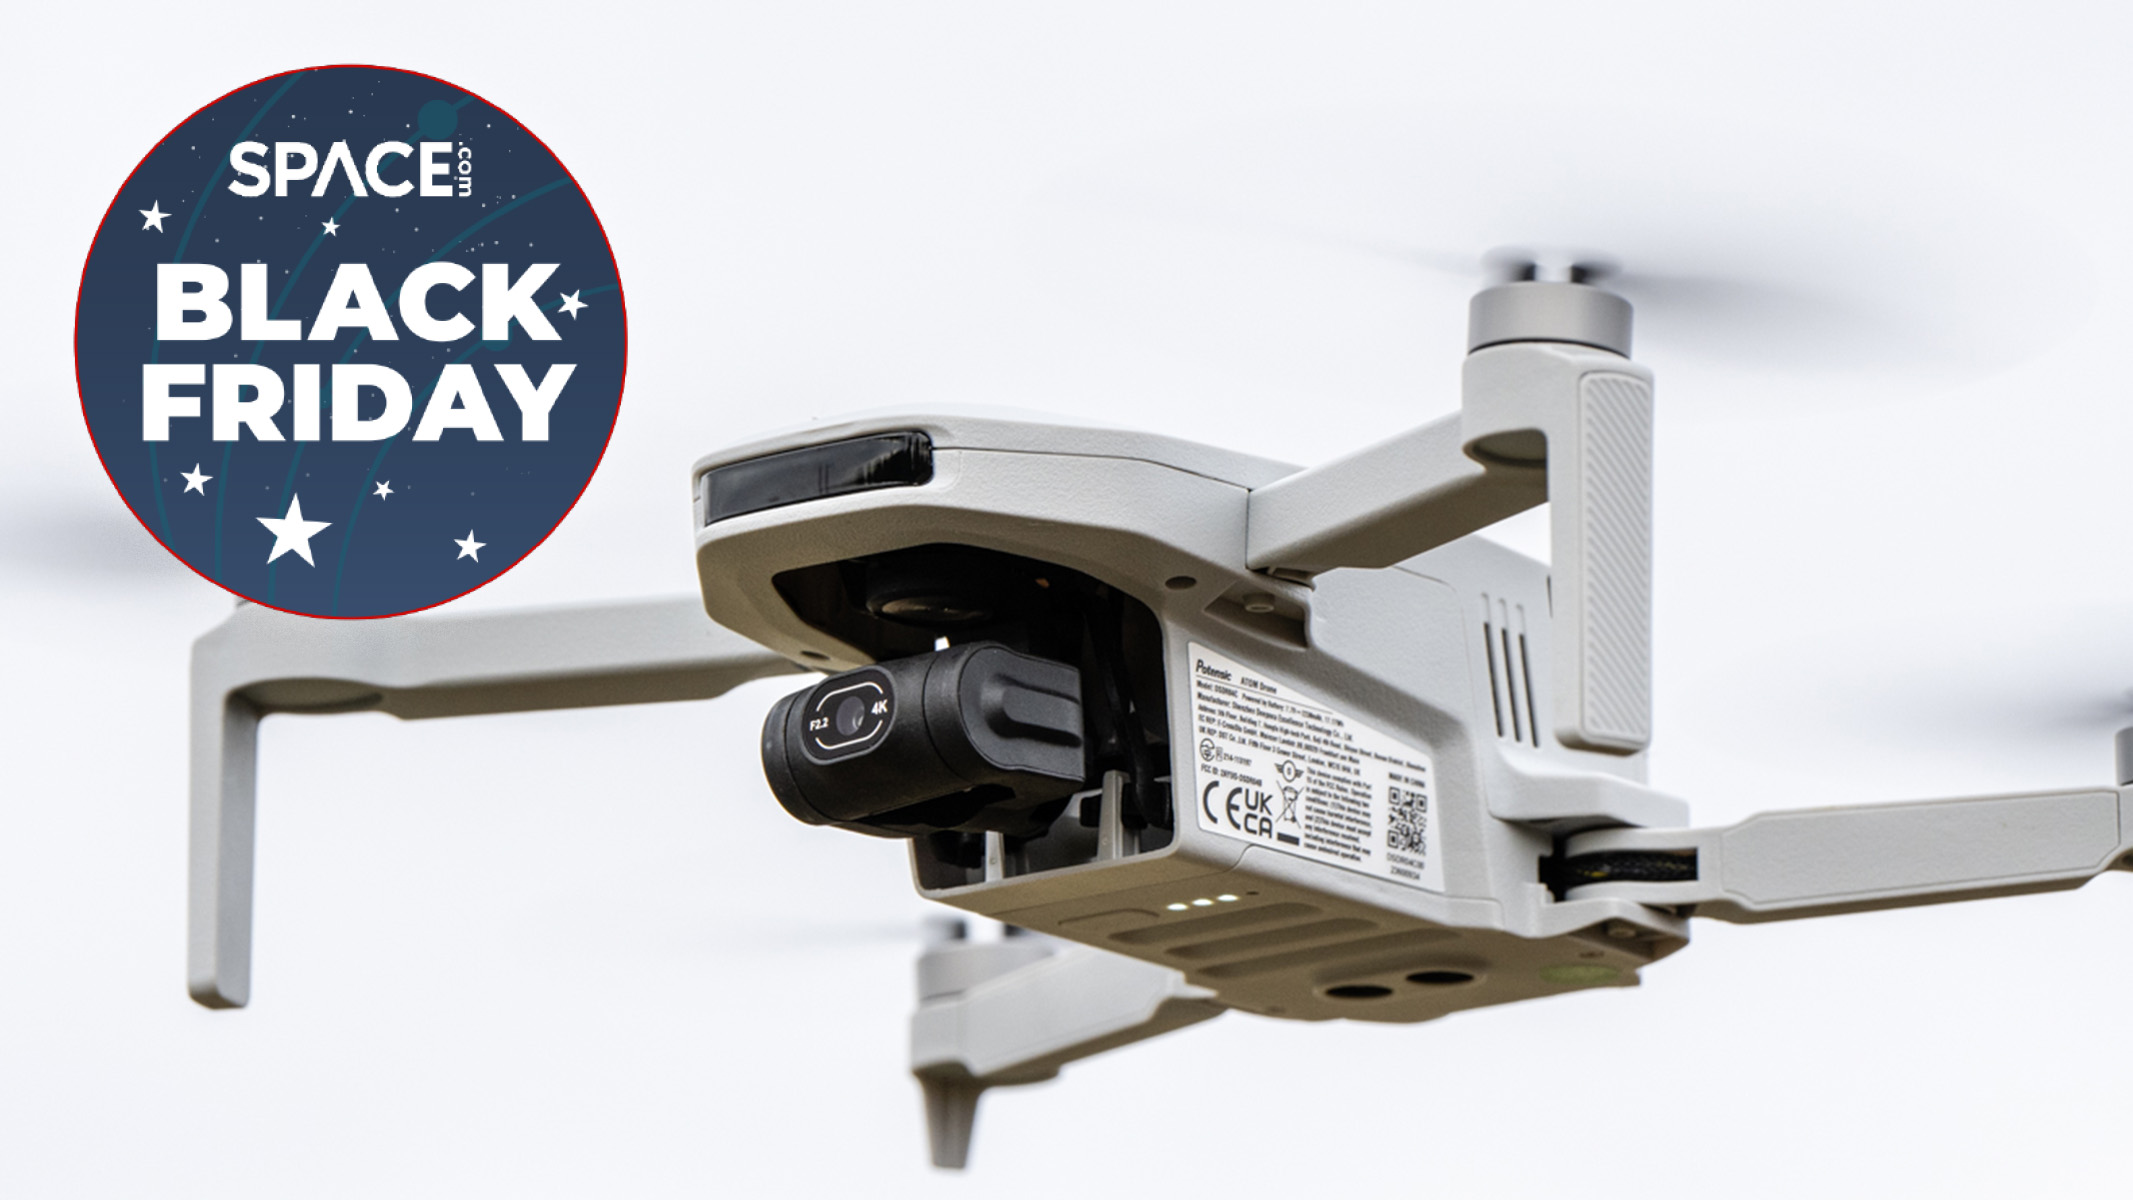 Fly high with the lowest price on the DJI Mini 2 SE drone during Black  Friday sales